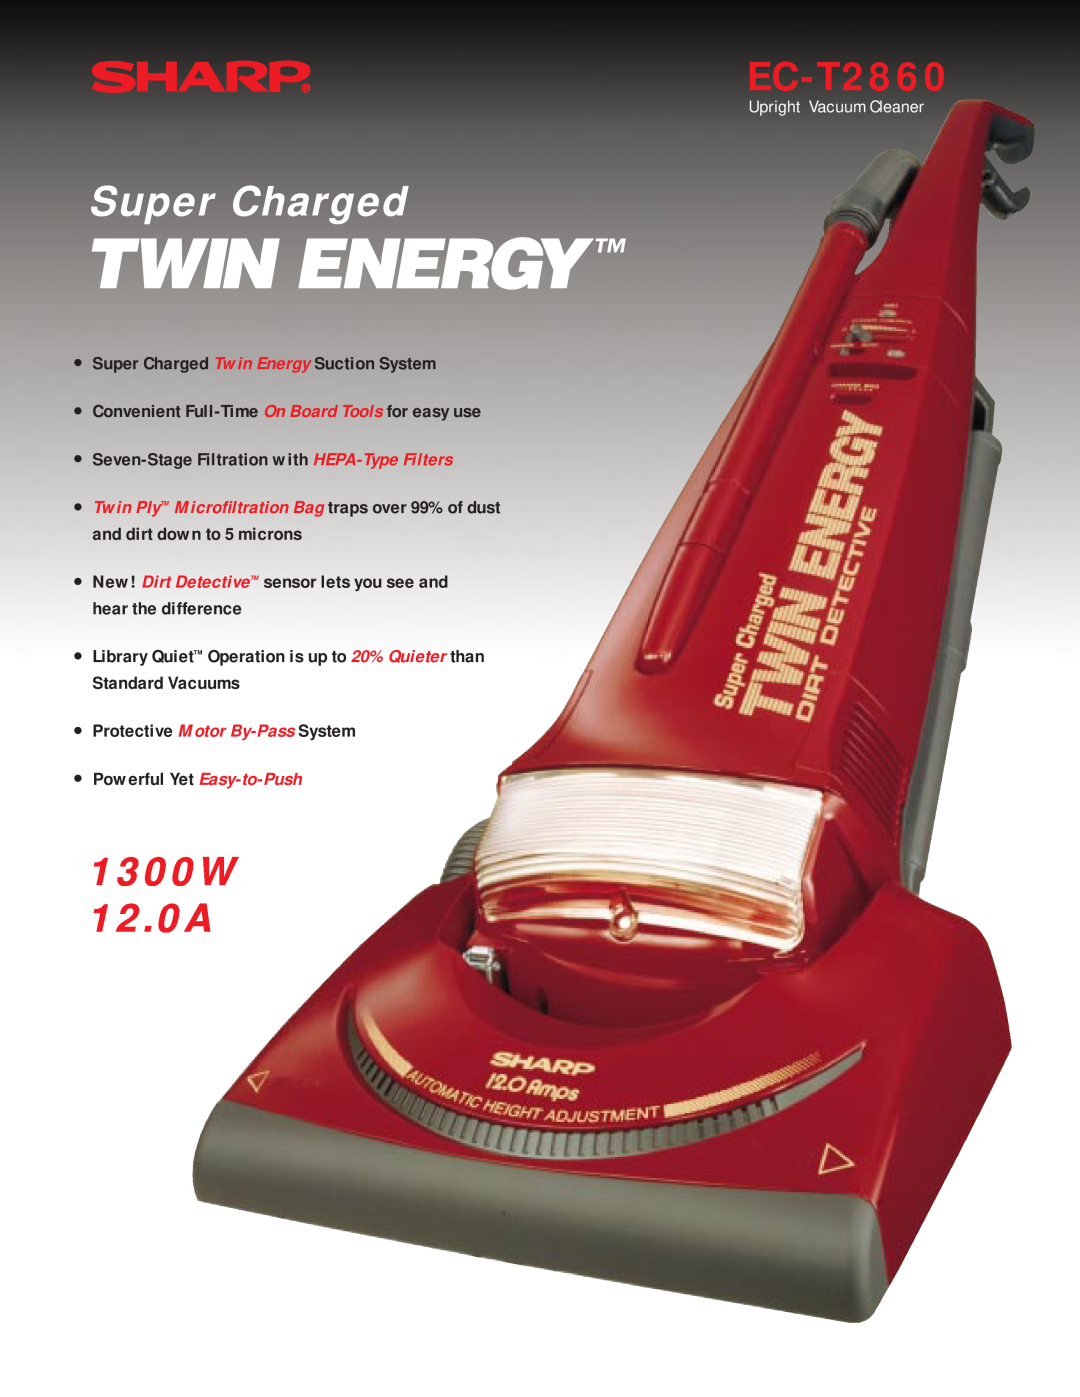 Sharp EC-T2860 manual Super Charged, 1300W 12.0A, Protective Motor By-Pass System, Powerful Yet Easy-to-Push 